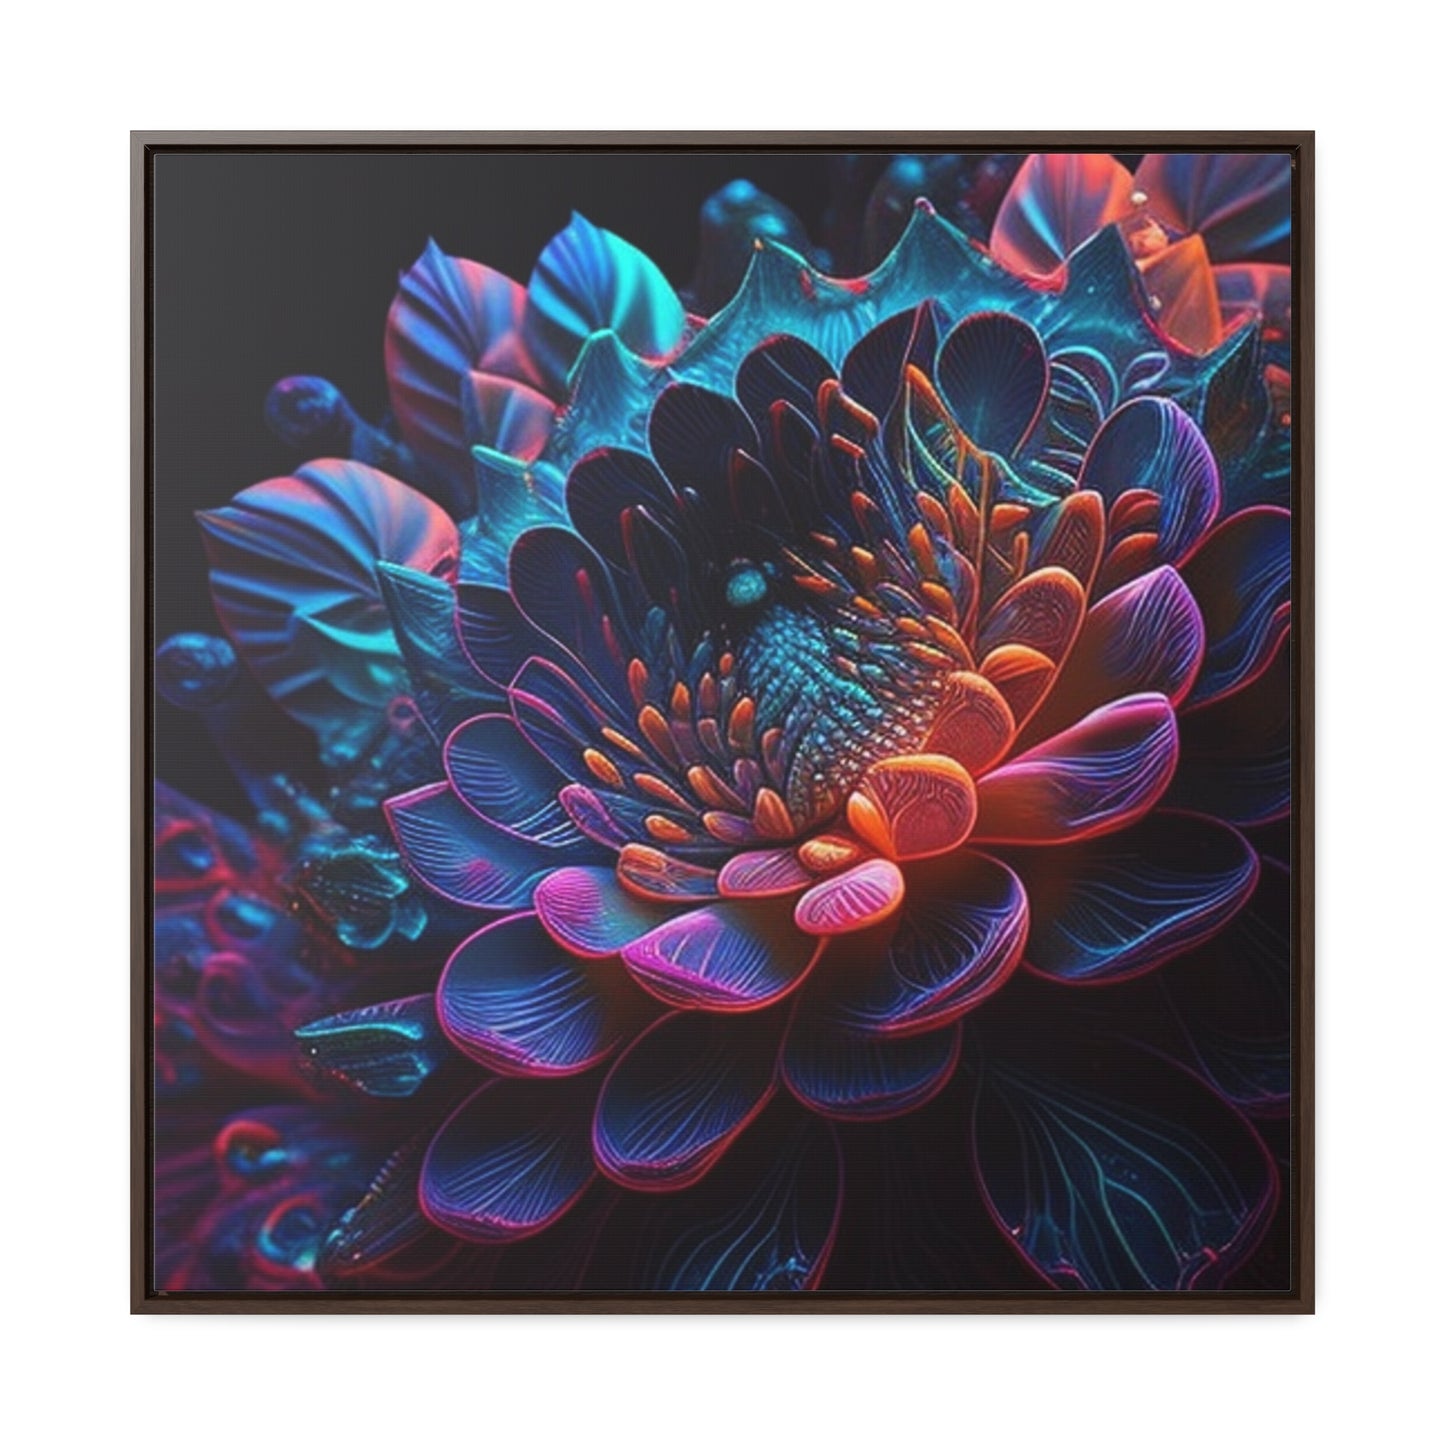 Gallery Canvas Wraps, Square Frame Neon Florescent Glow 4